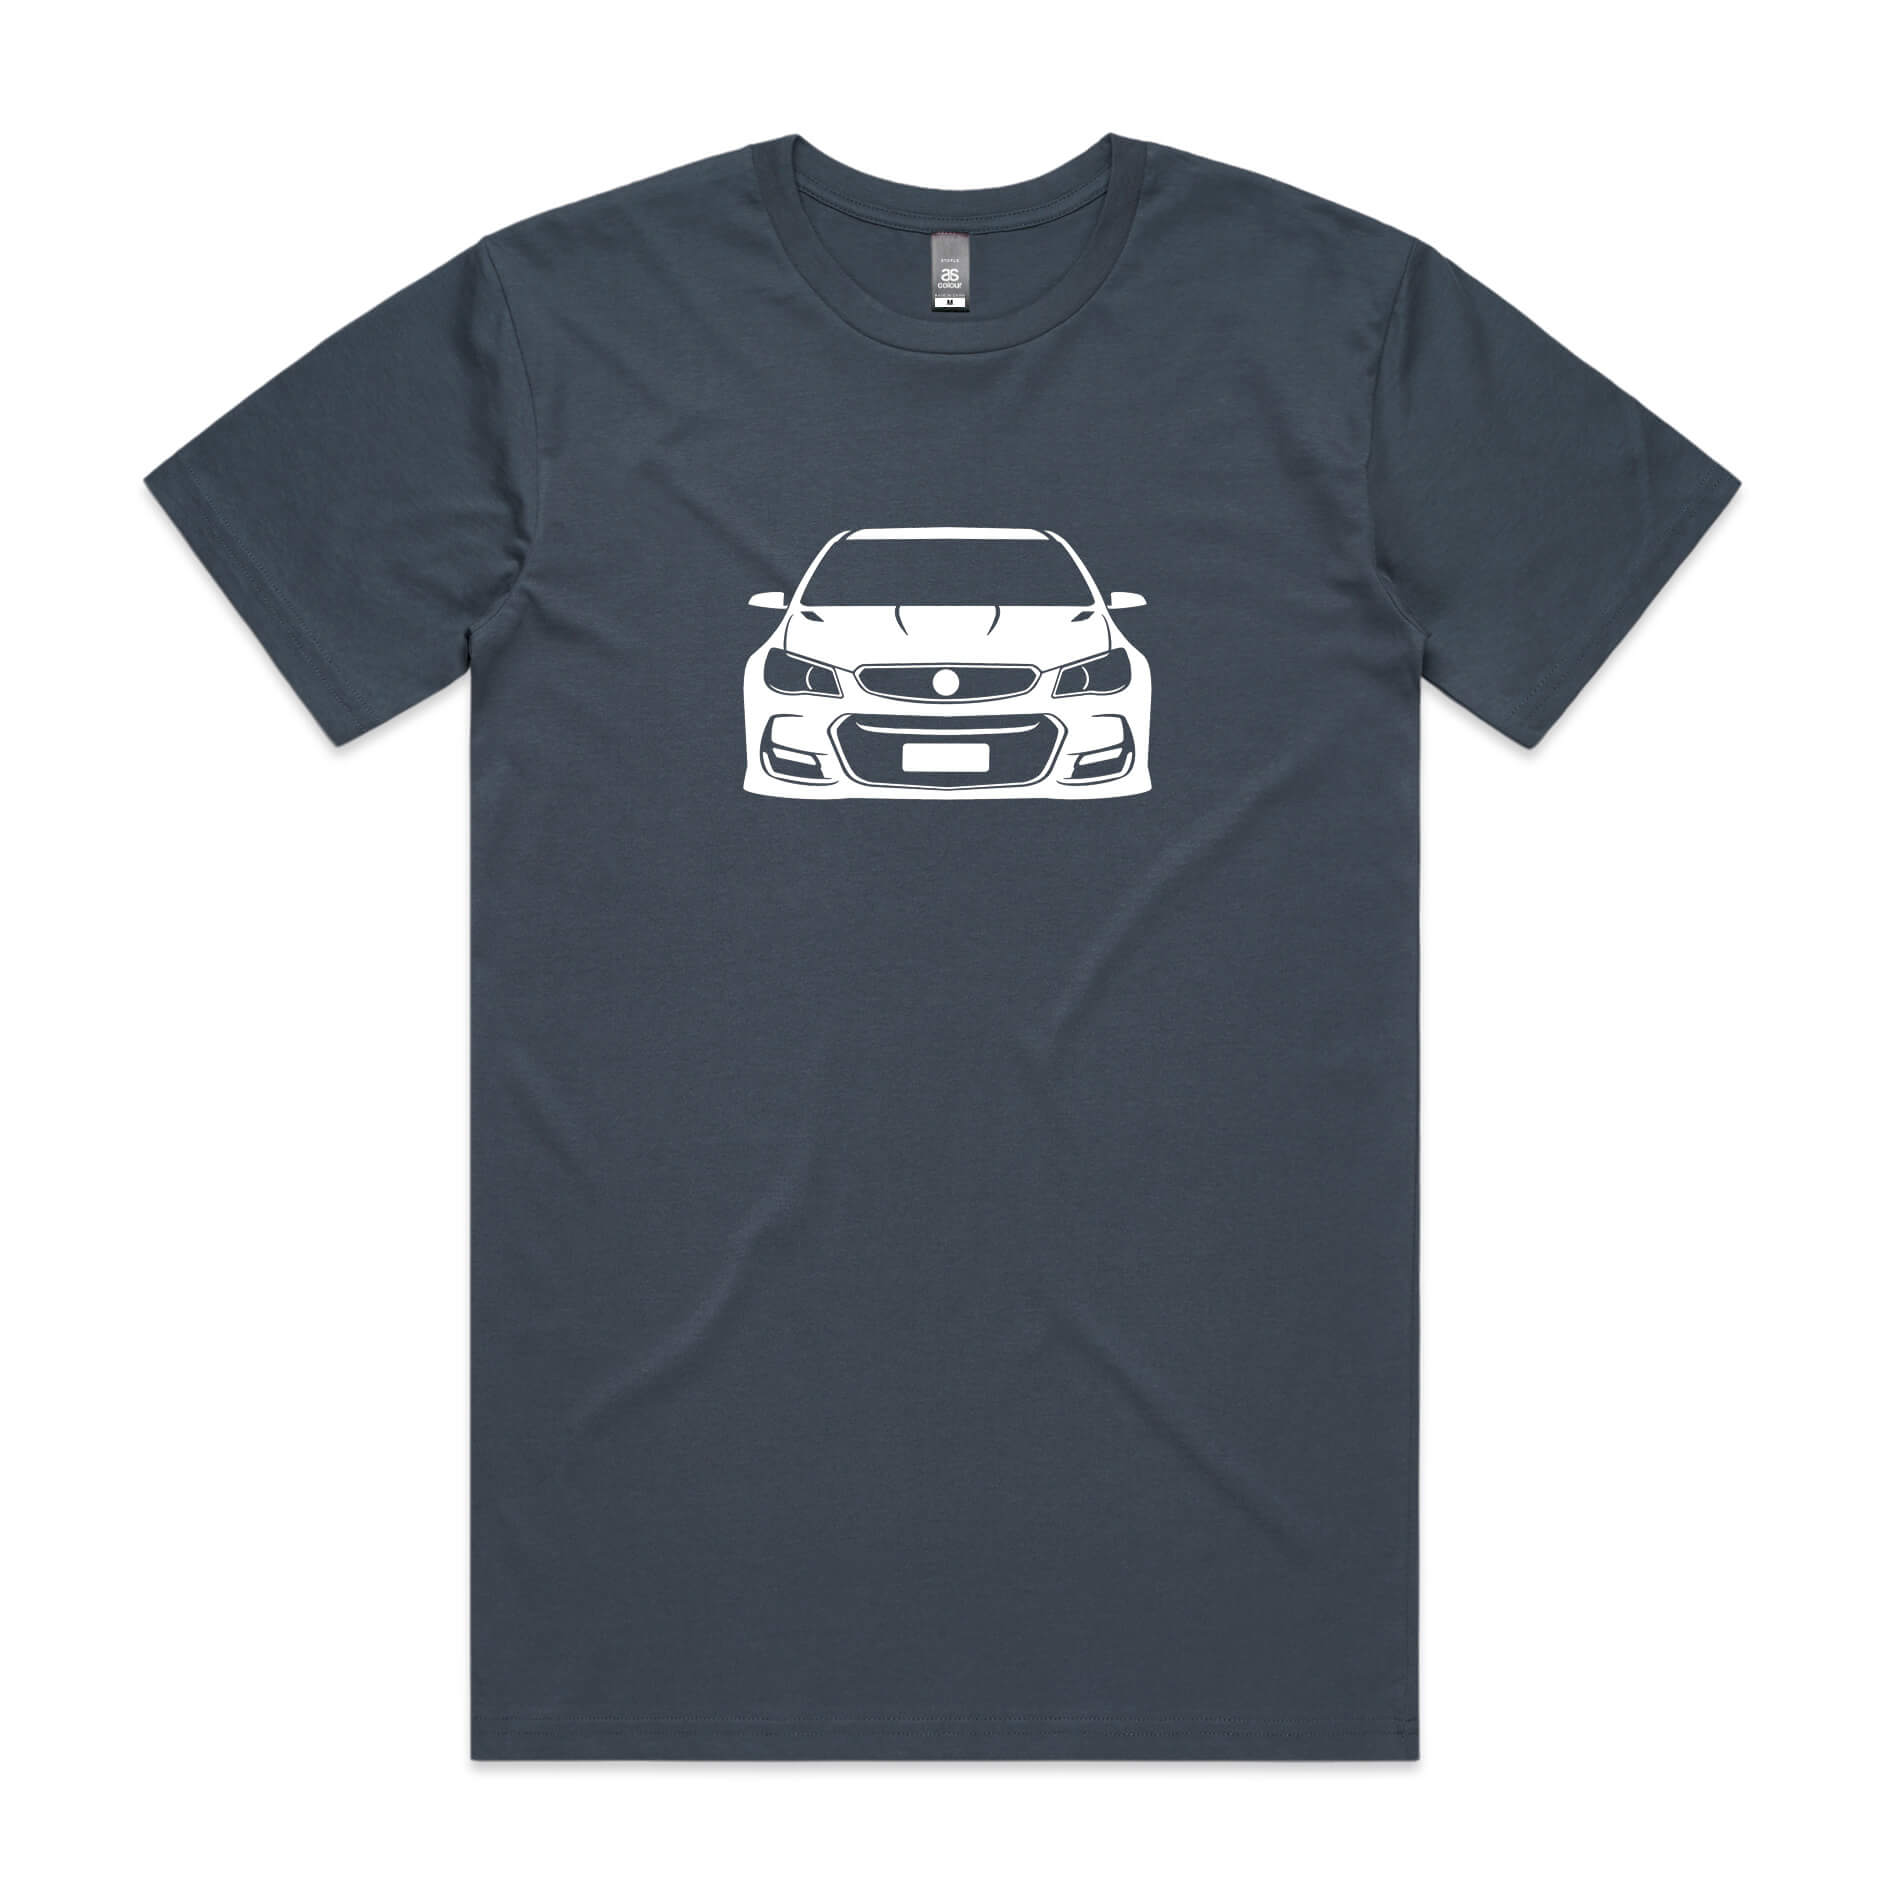 Holden VF Commodore t-shirt in Petrol